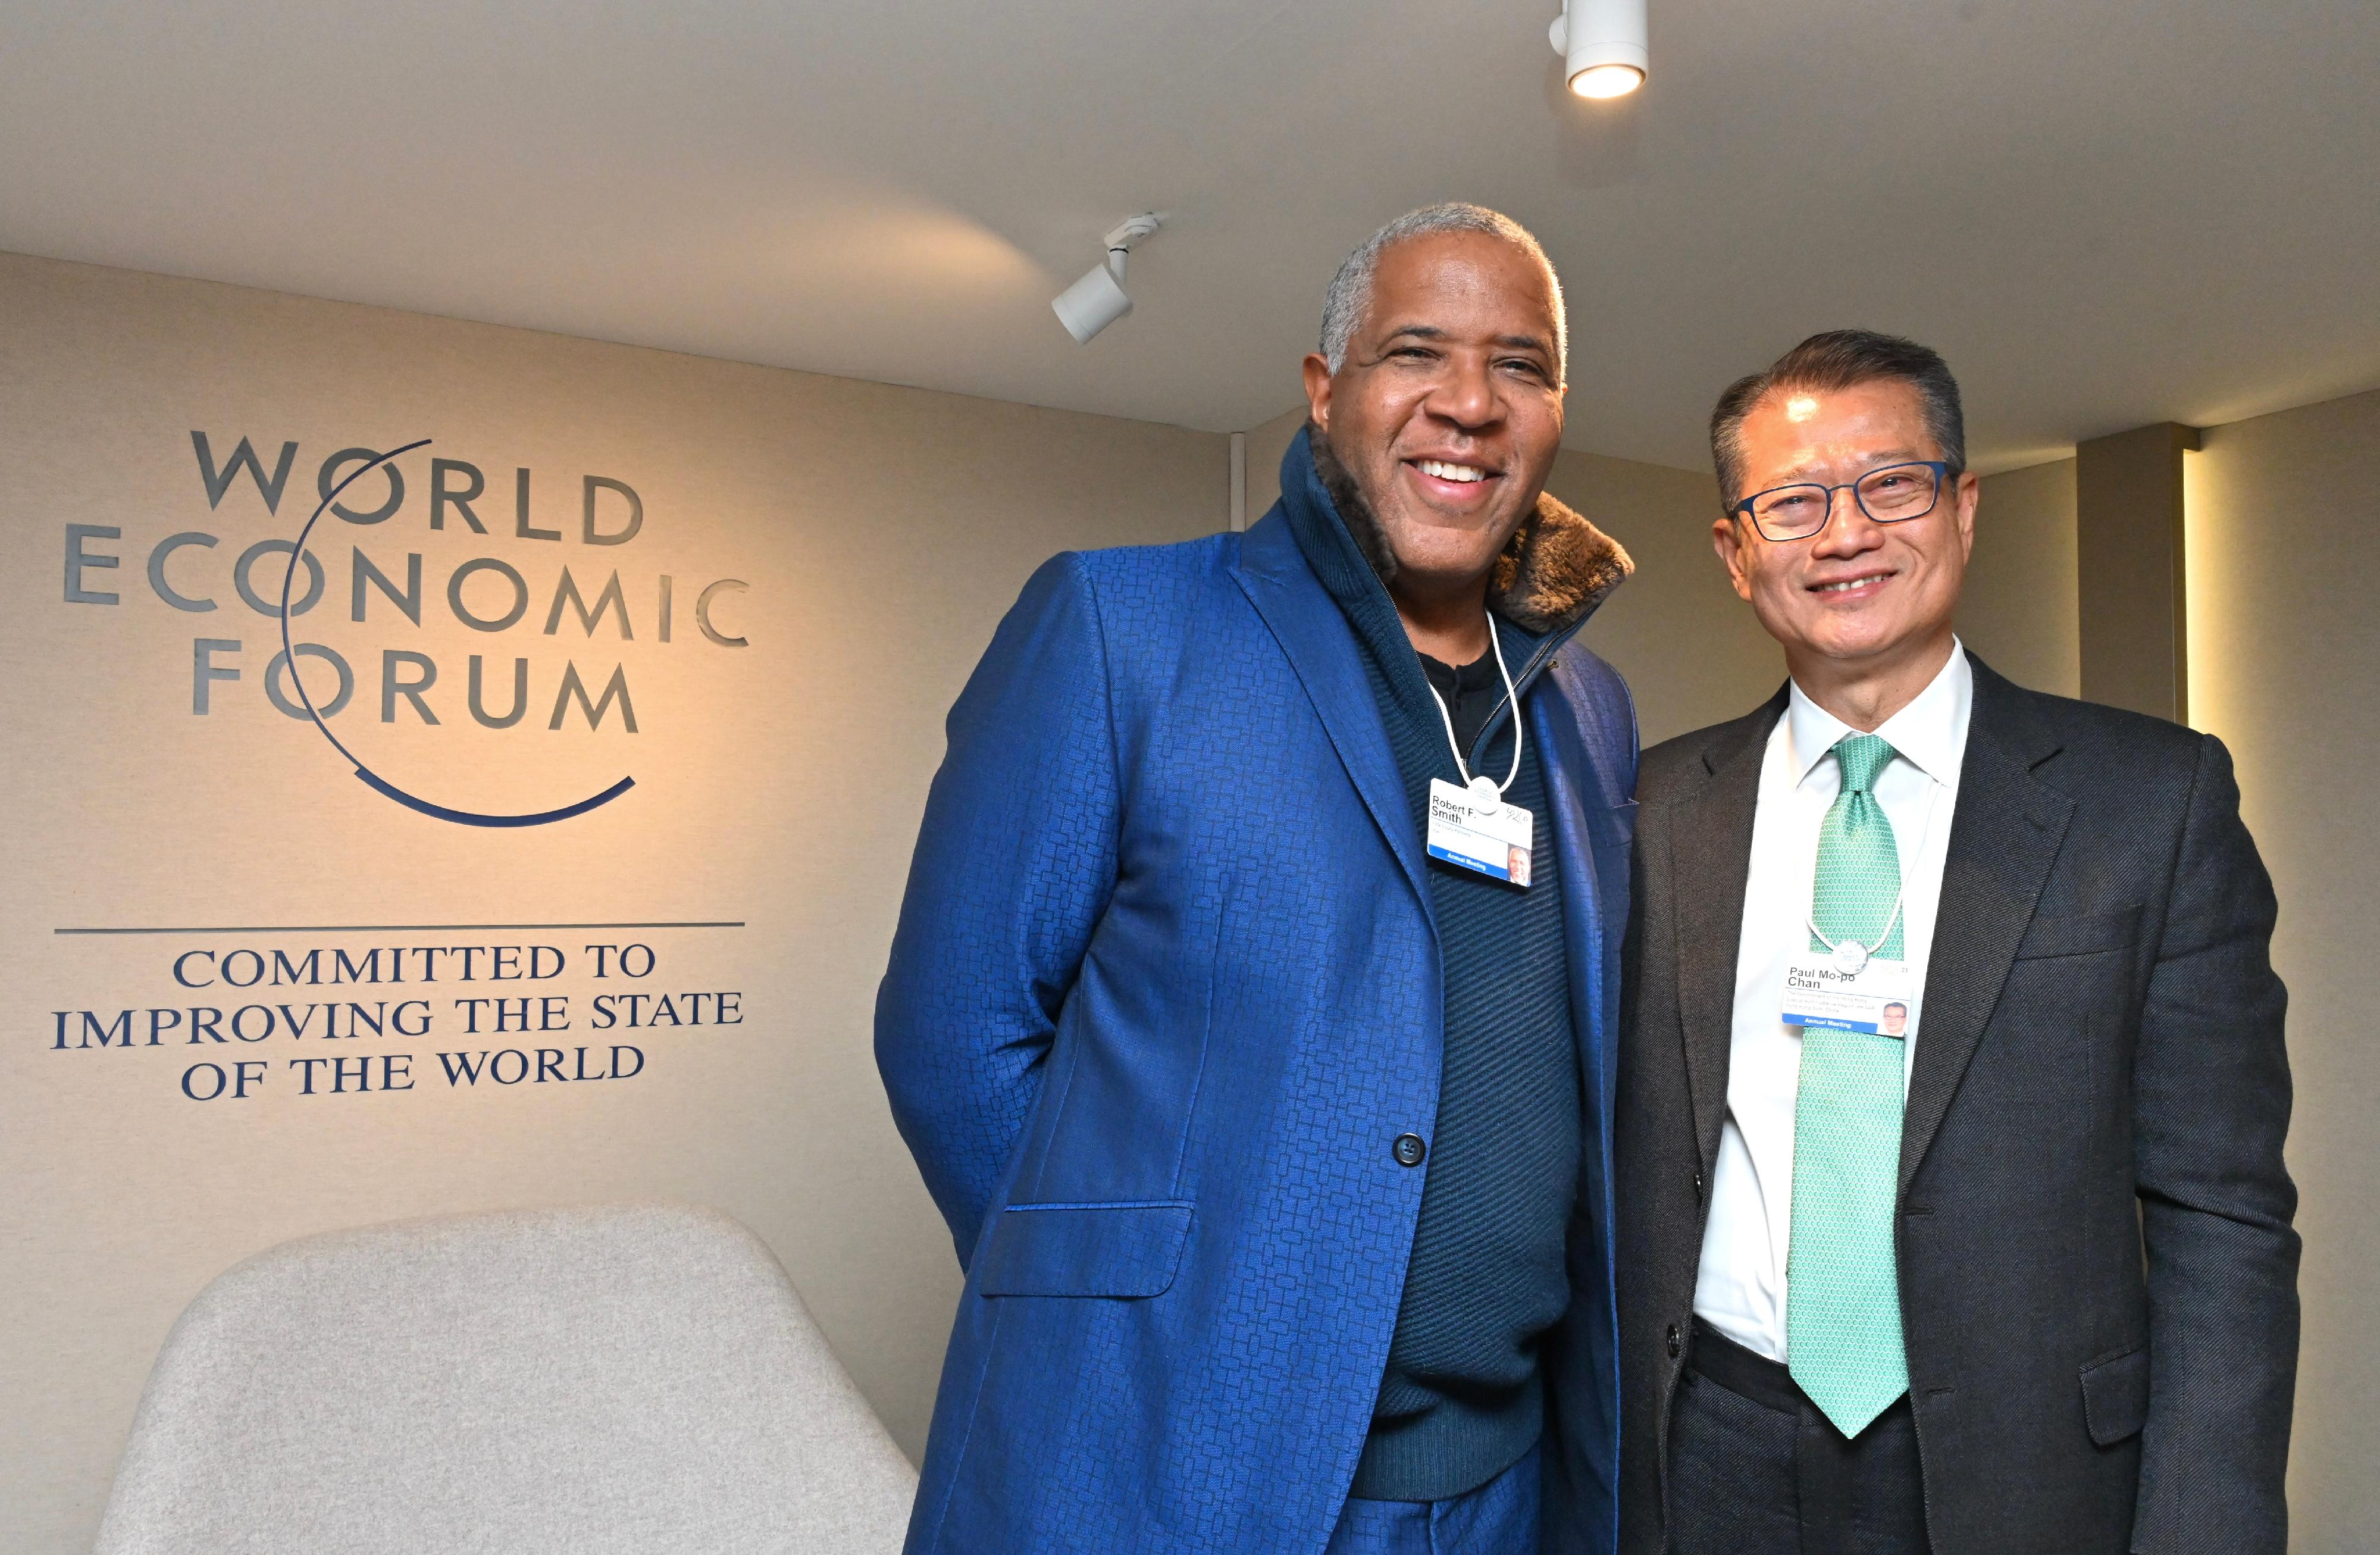 The Financial Secretary, Mr Paul Chan (right), met with Founder and Chairman of Vista Equity Partners, Mr Robert Smith, on January 16 at the World Economic Forum Annual Meeting 2023.